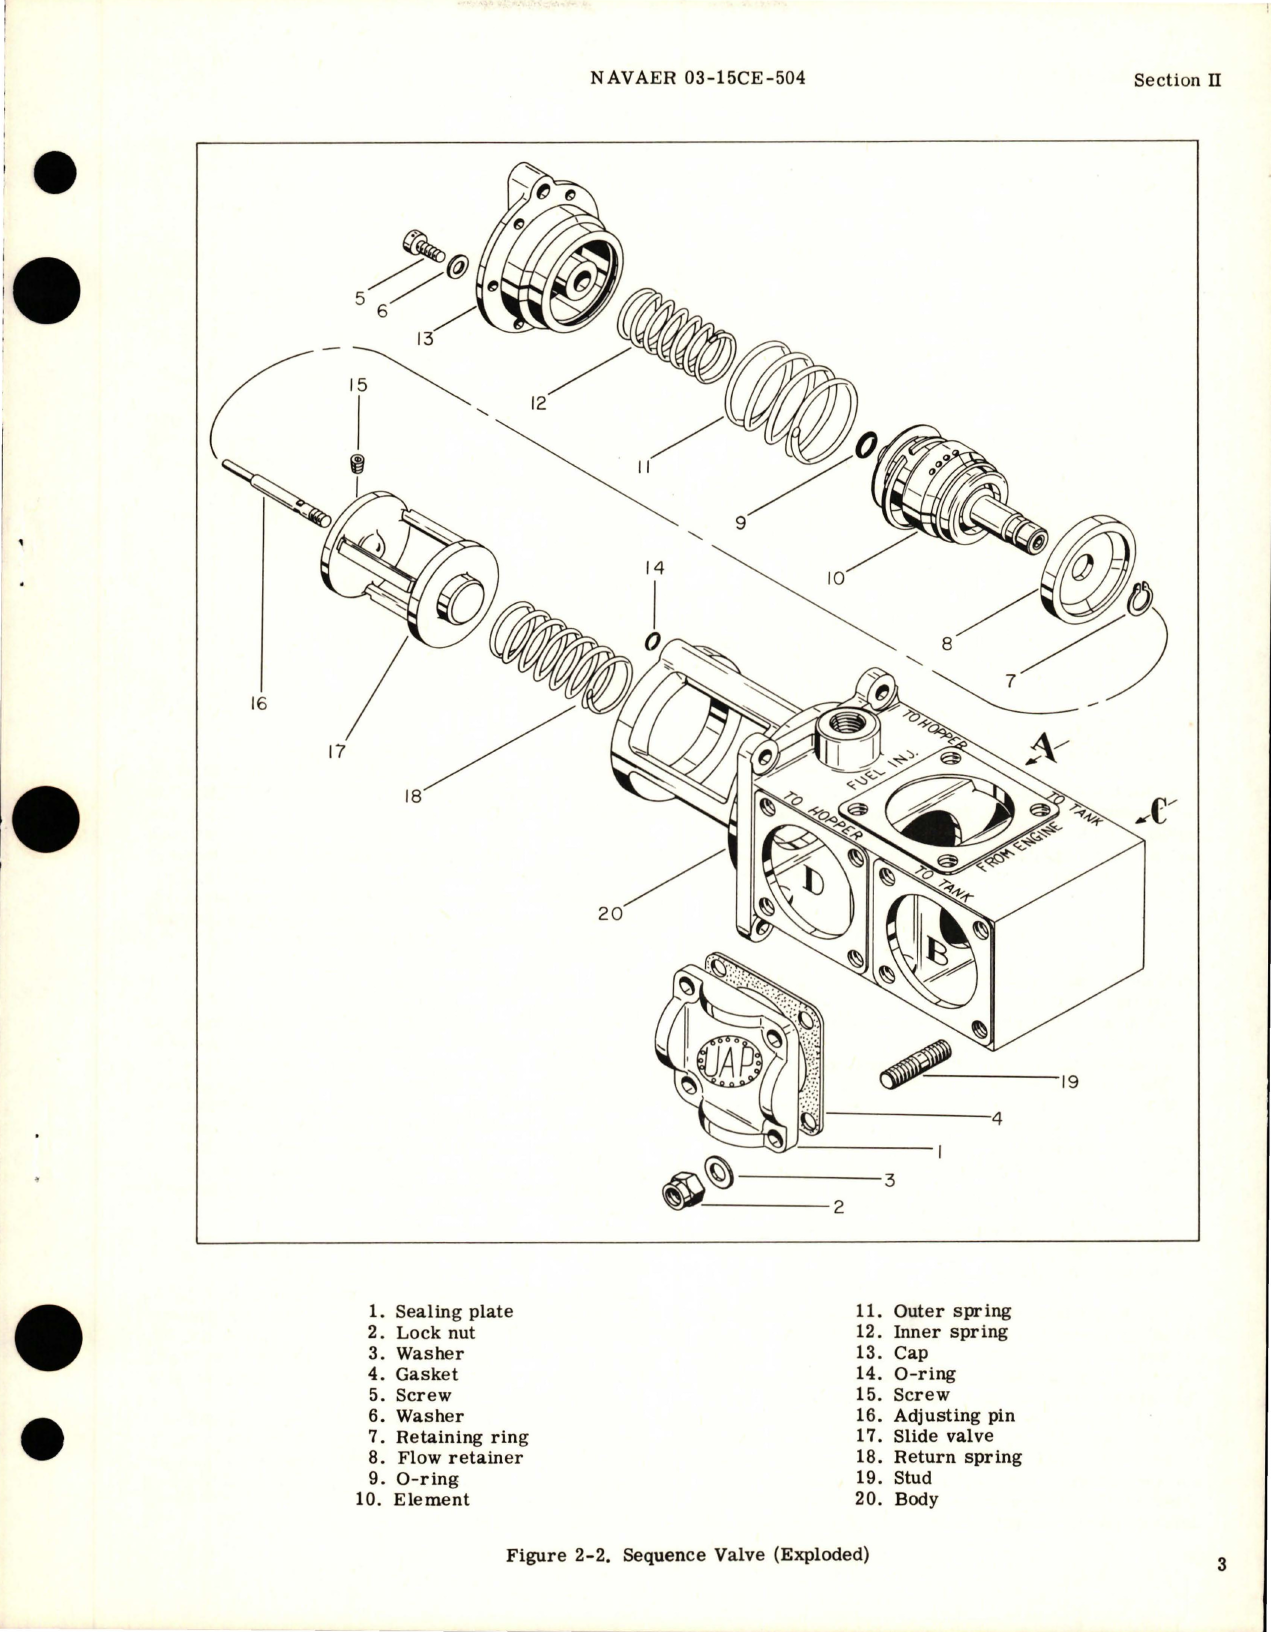 Sample page 5 from AirCorps Library document: Overhaul Instructions for Sequence Valve Assembly - Part U-7950-1